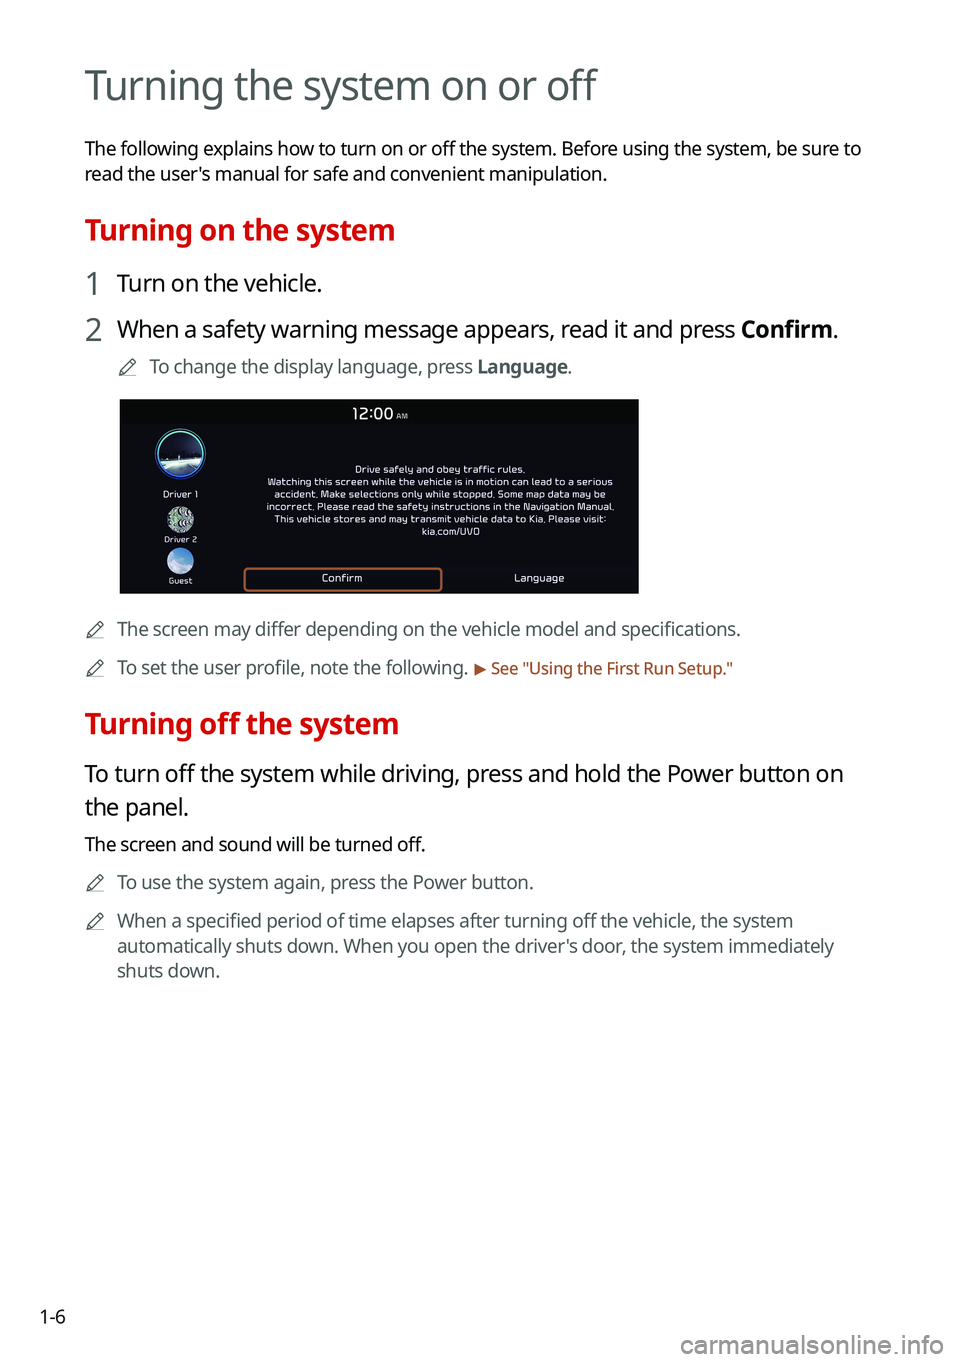 KIA SOUL 2022  Navigation System Quick Reference Guide 1-6
Turning the system on or off
The following explains how to turn on or off the system. Before using the system, be sure to 
read the user's manual for safe and convenient manipulation.
Turning 